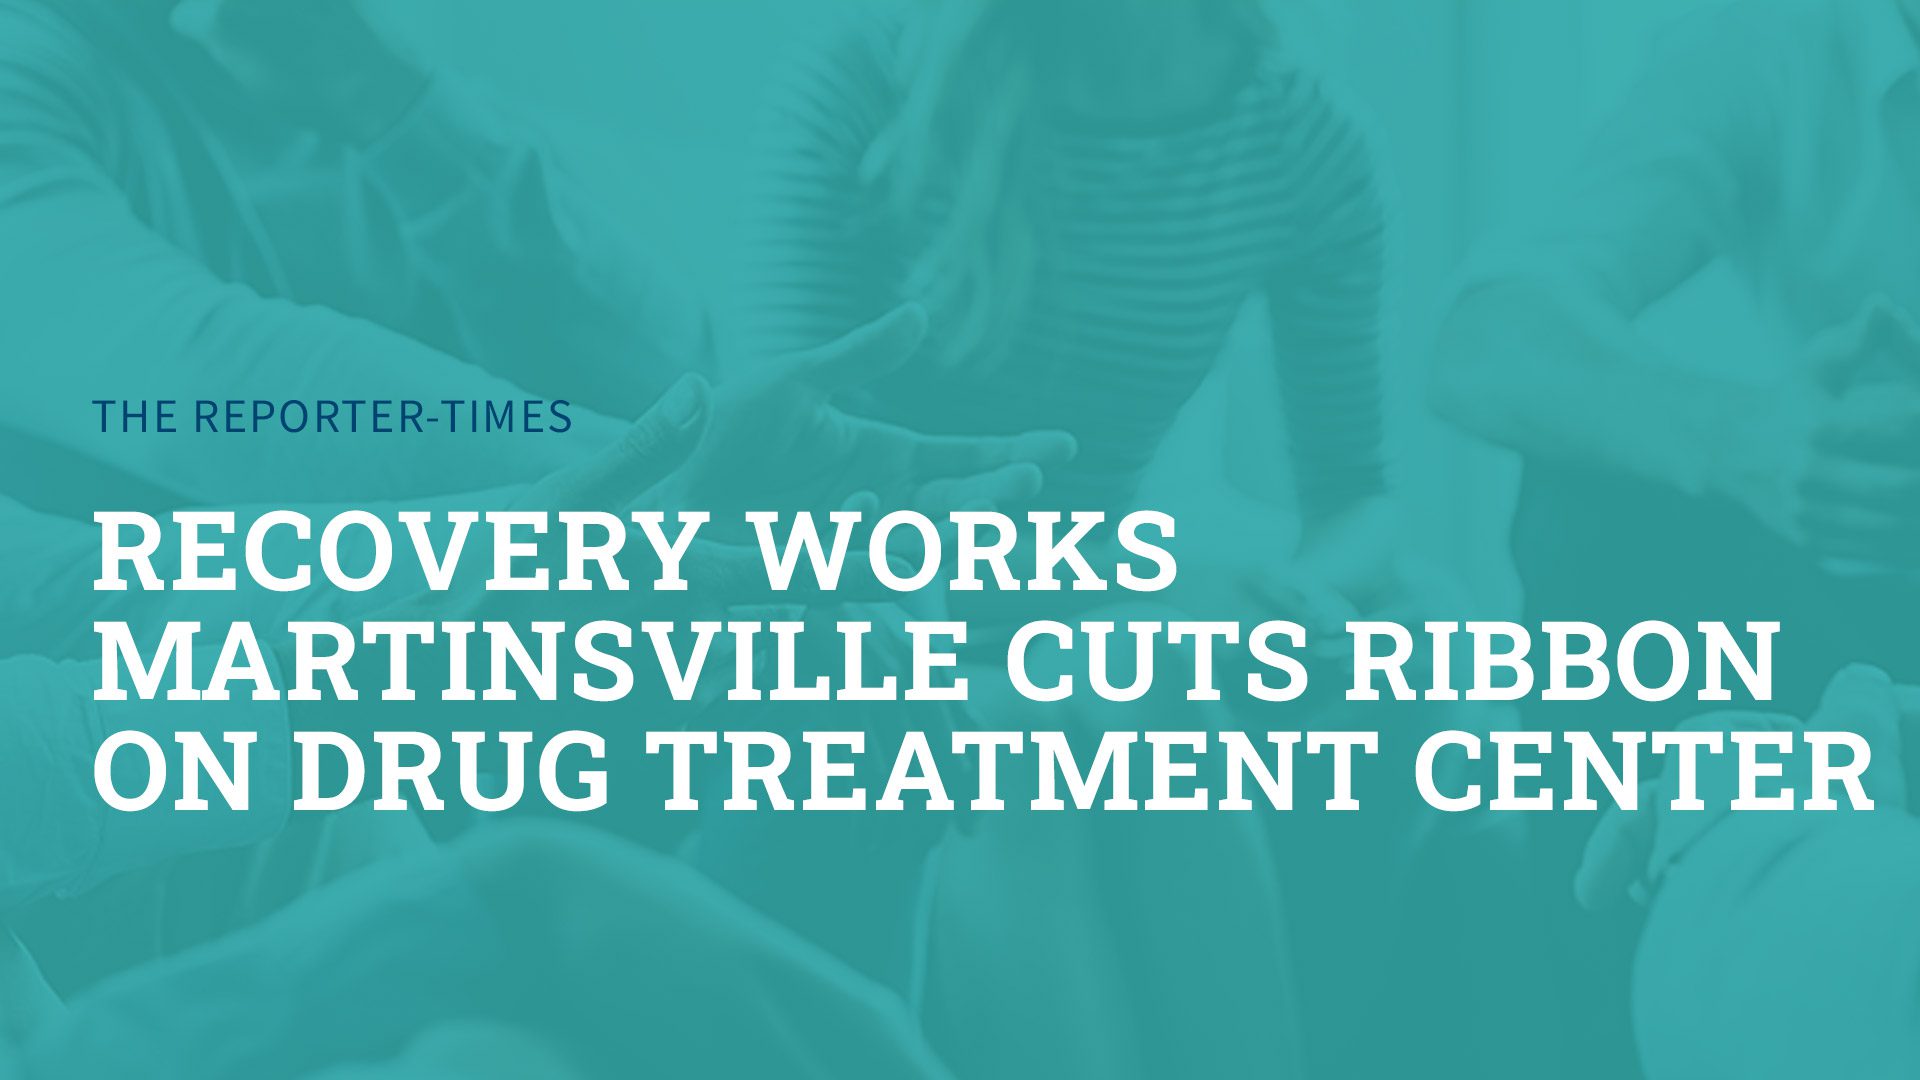 Recovery Works Martinsville cuts ribbon on drug treatment center